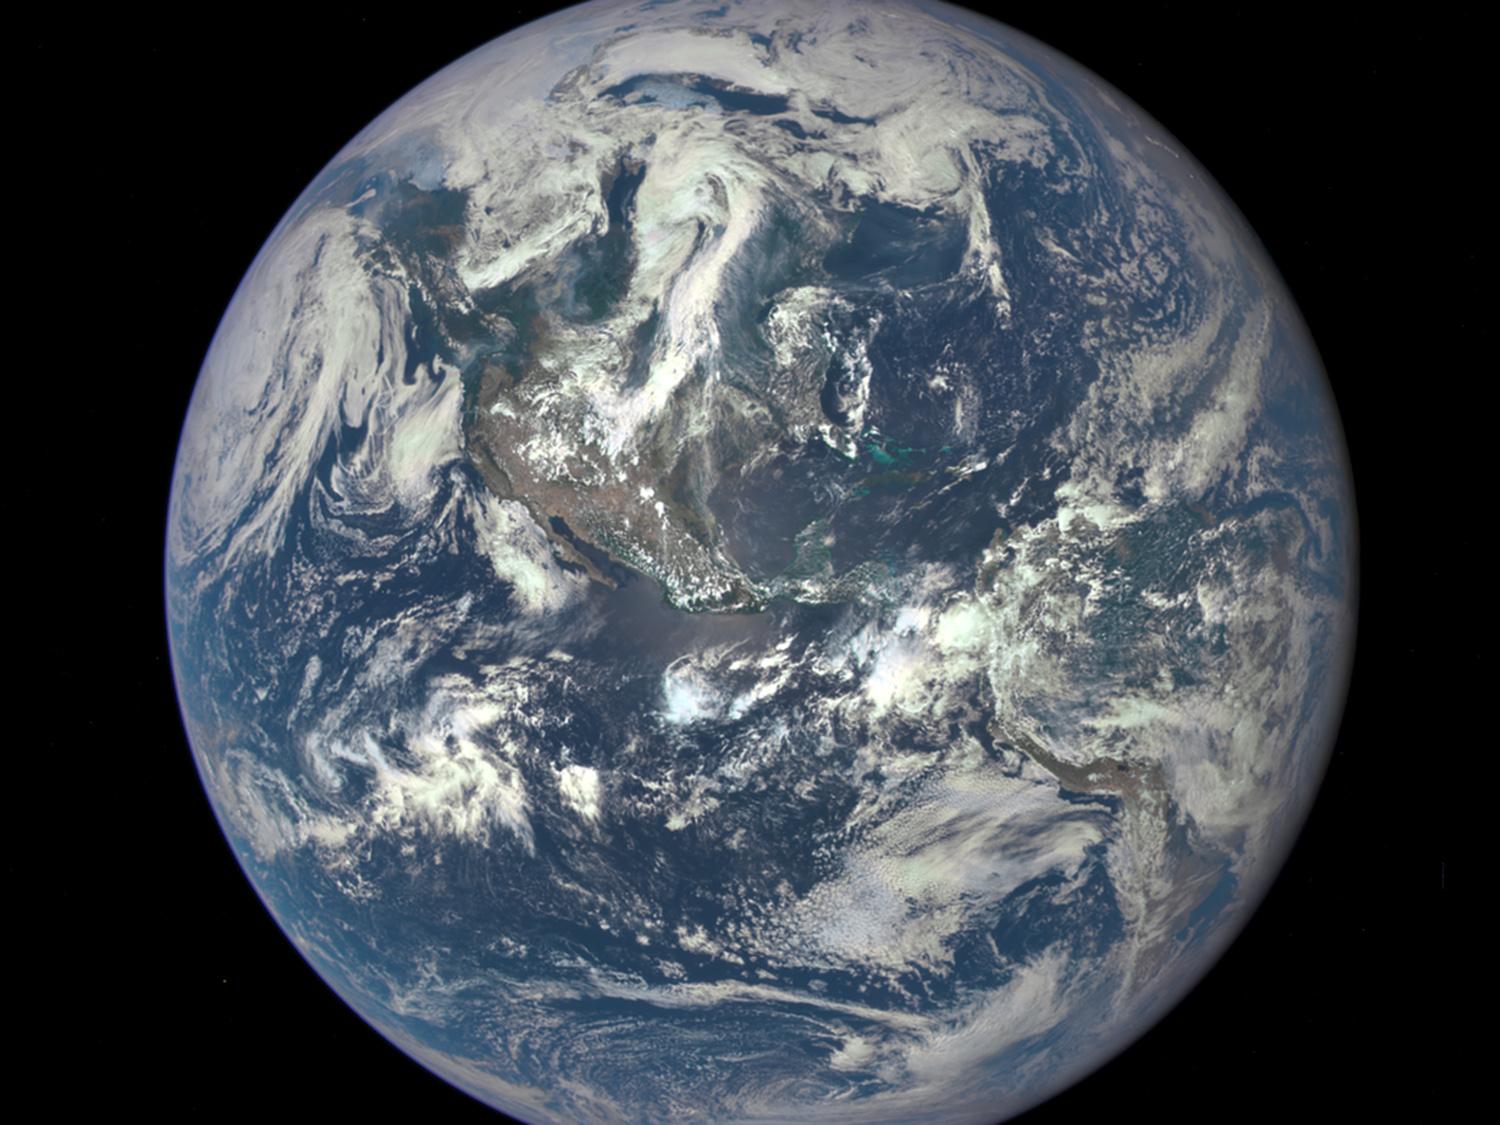 Detailed photo of the Earth from space, courtesy of NASA